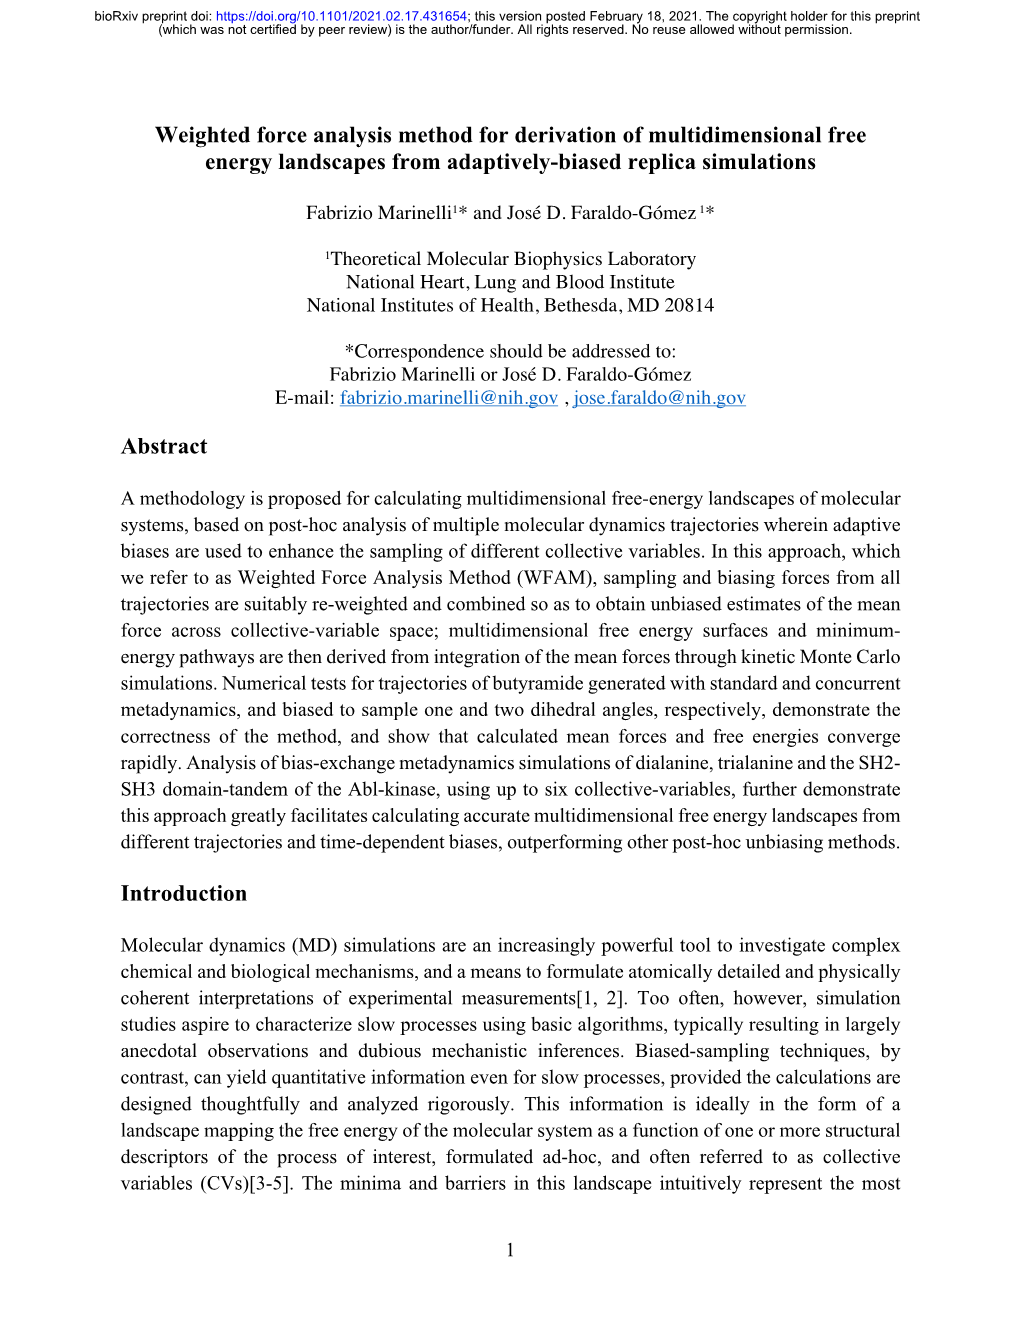 Weighted Force Analysis Method for Derivation of Multidimensional Free Energy Landscapes from Adaptively-Biased Replica Simulations